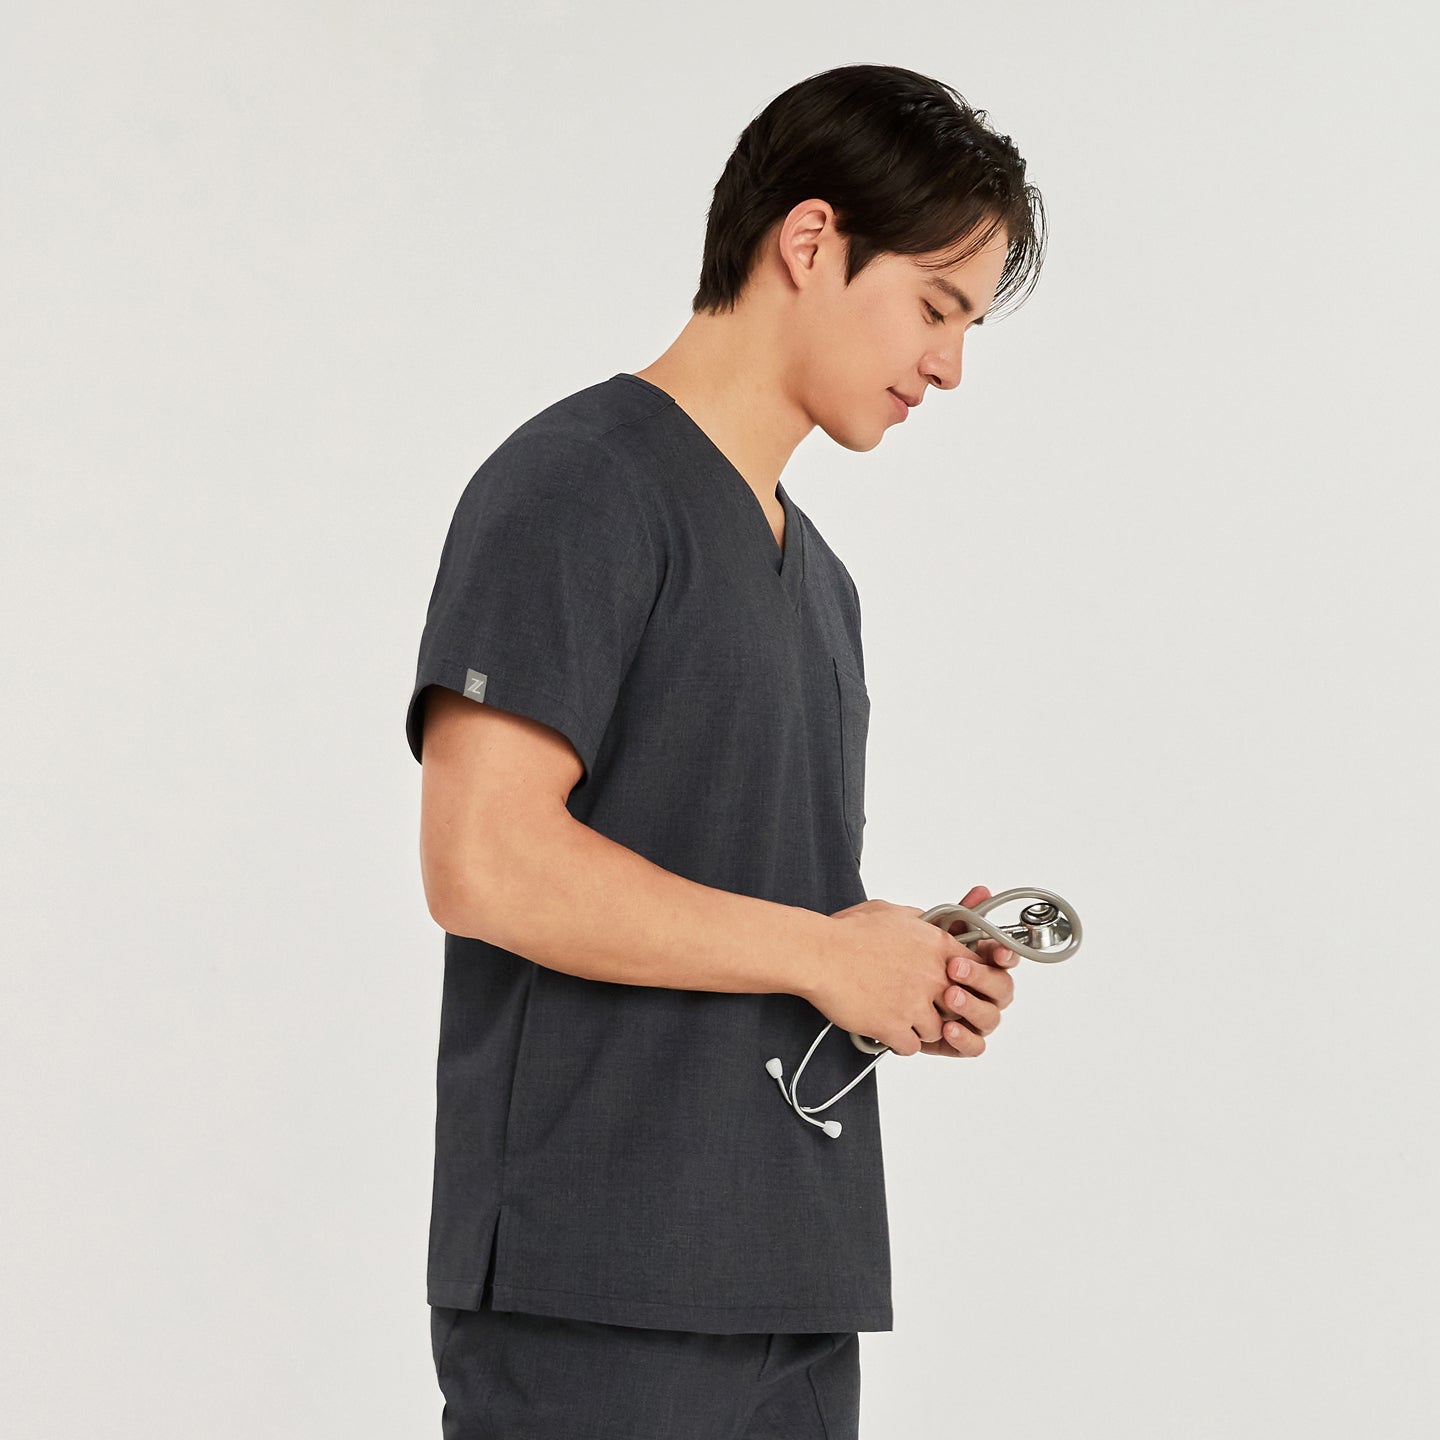 A man wearing a 3-pocket scrub top, shown from the side, holding a stethoscope,Charcoal Gray